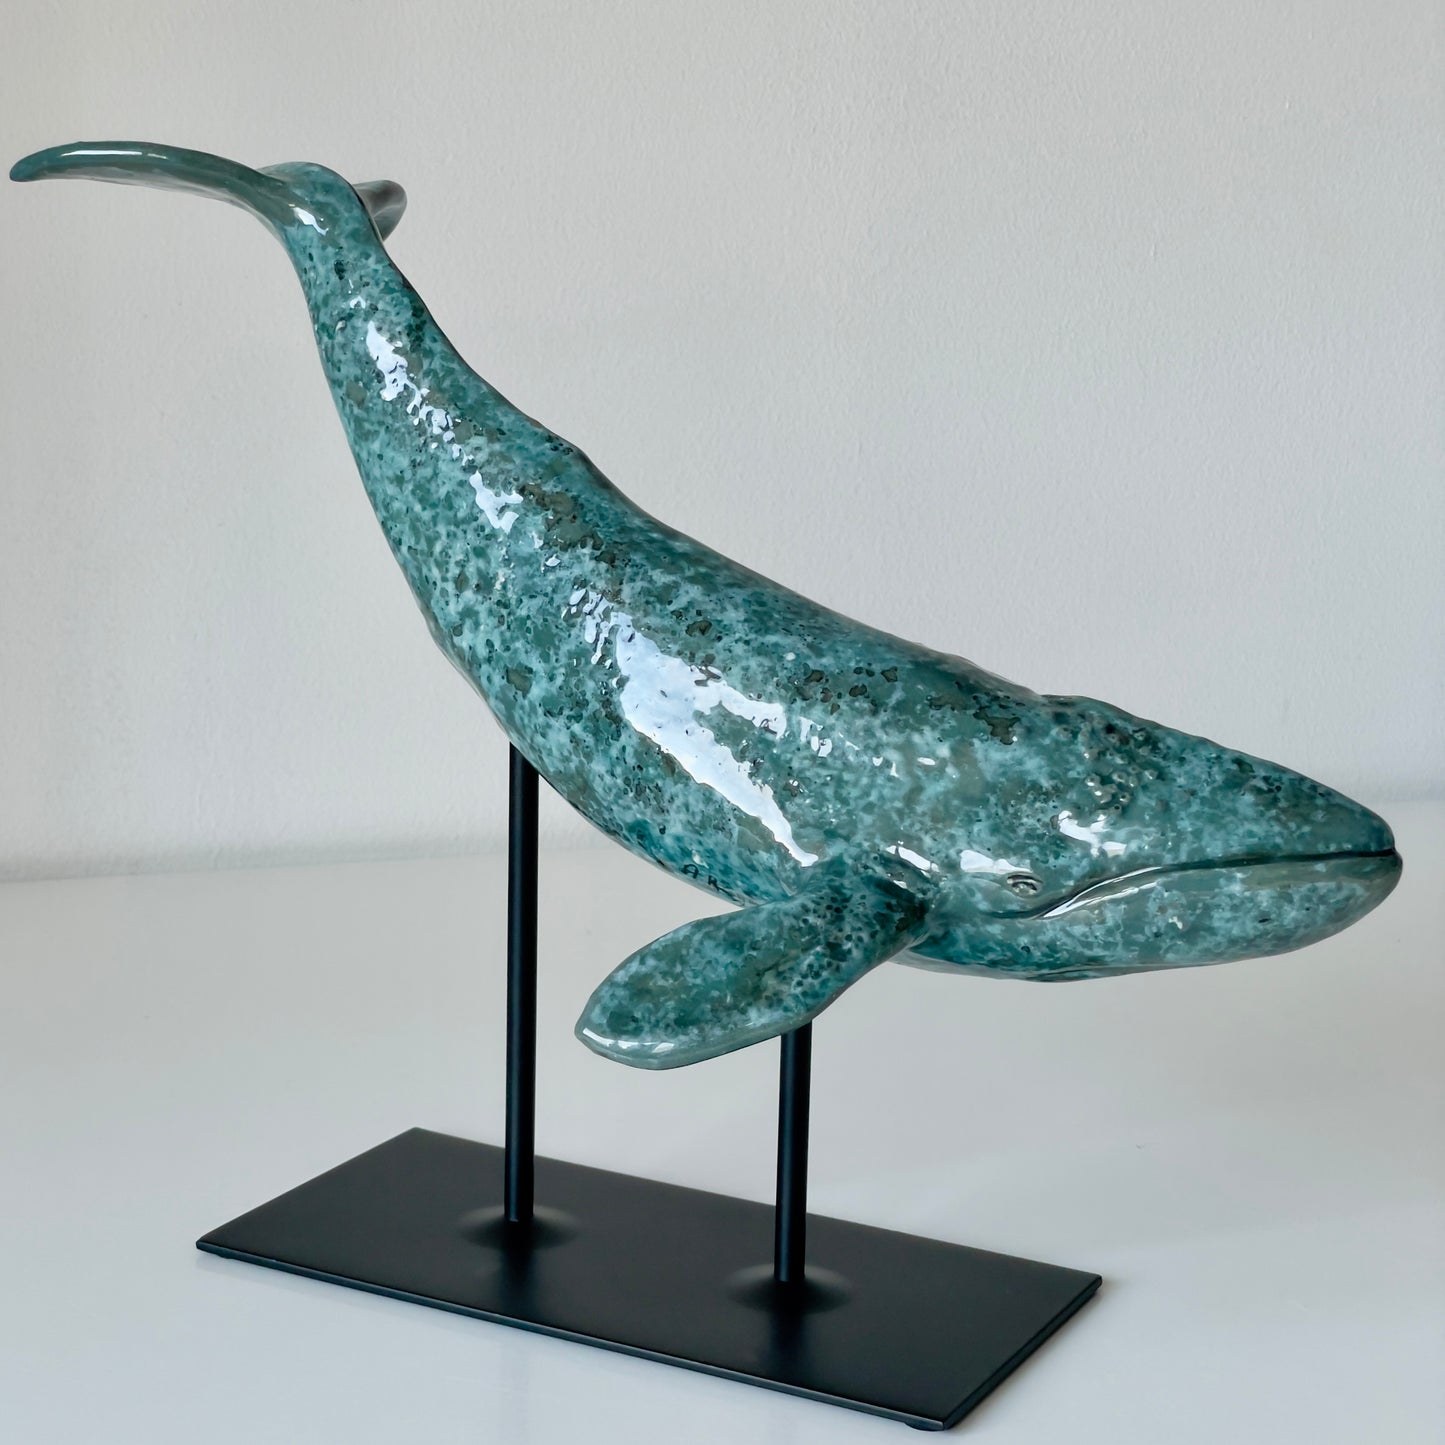 Gray whale sculpture on a metal stand